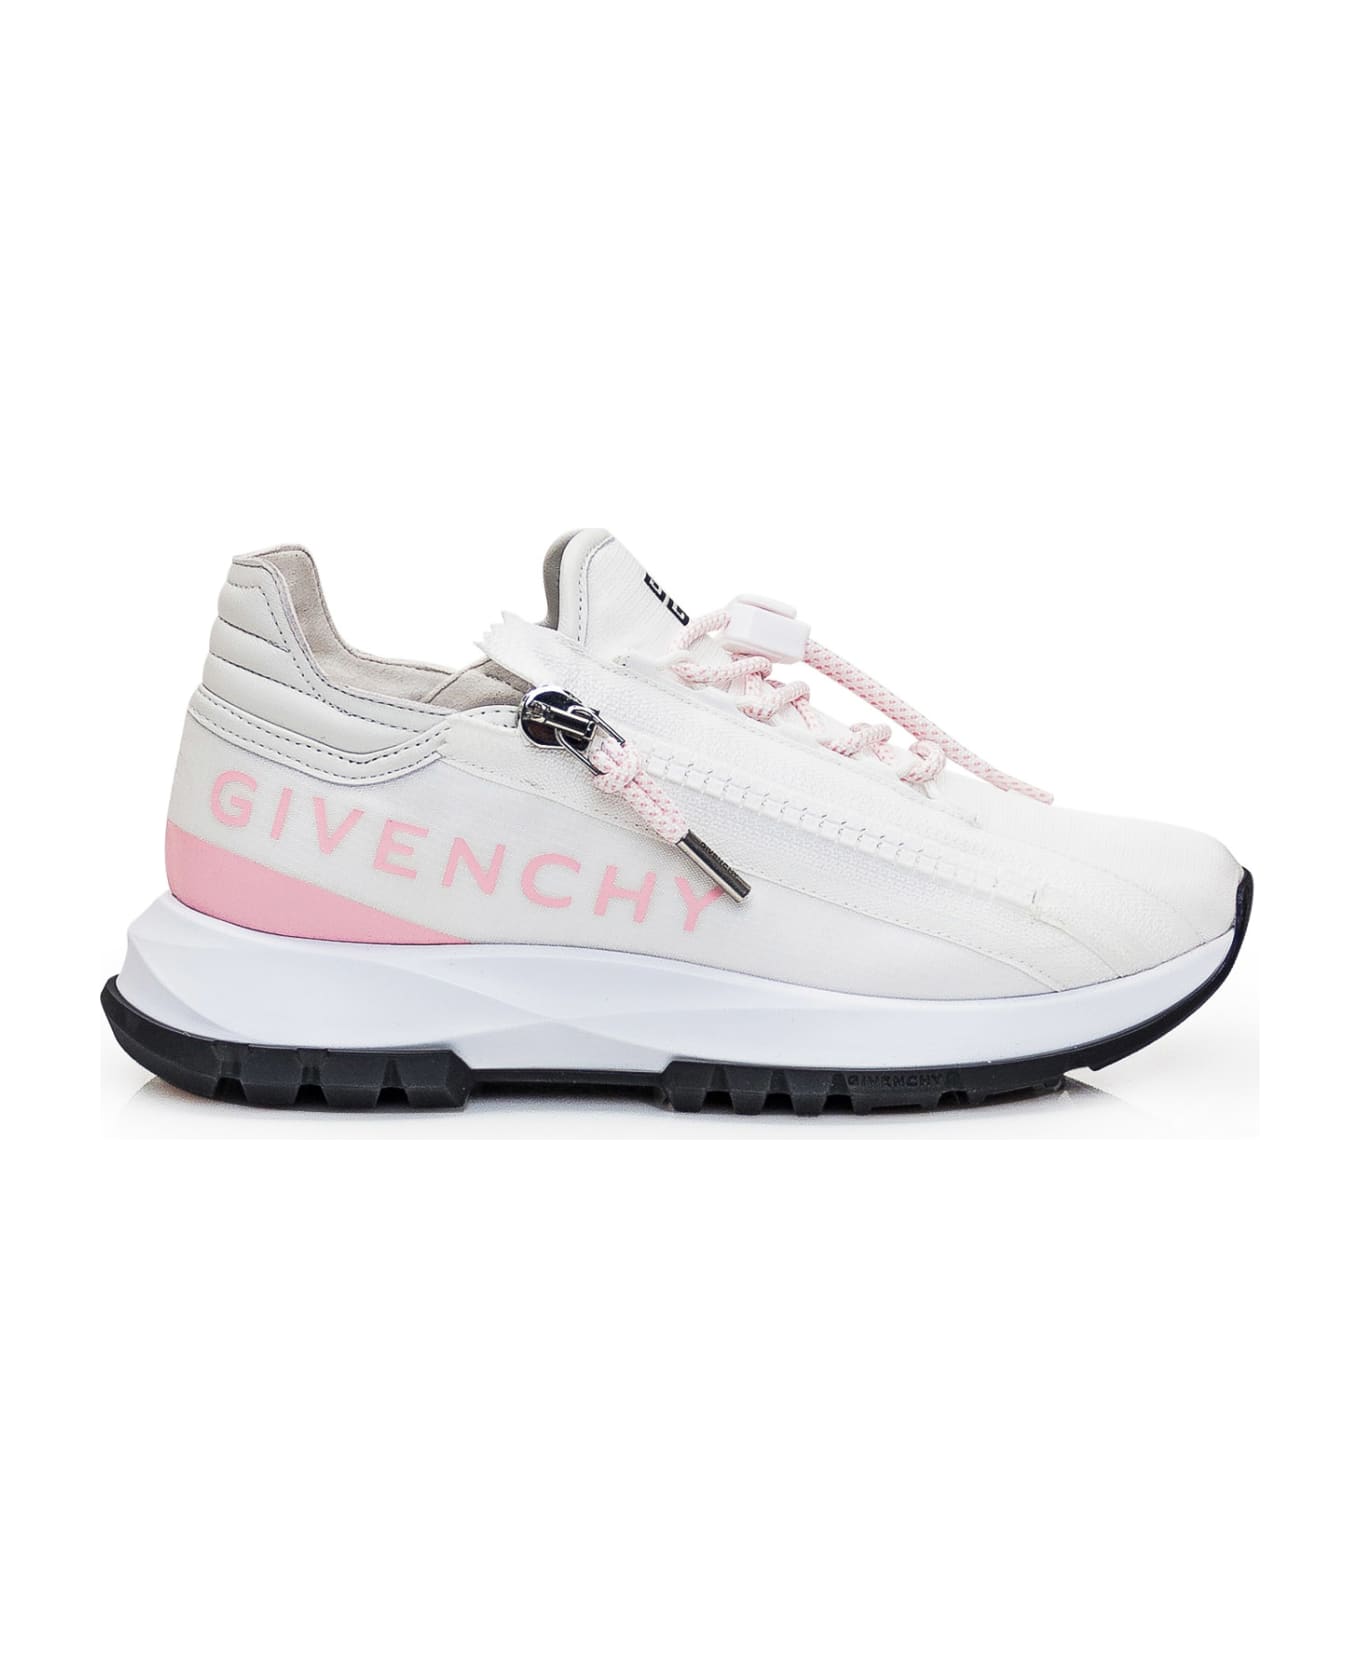 Givenchy 'spectre' Sneakers - WHITE PINK